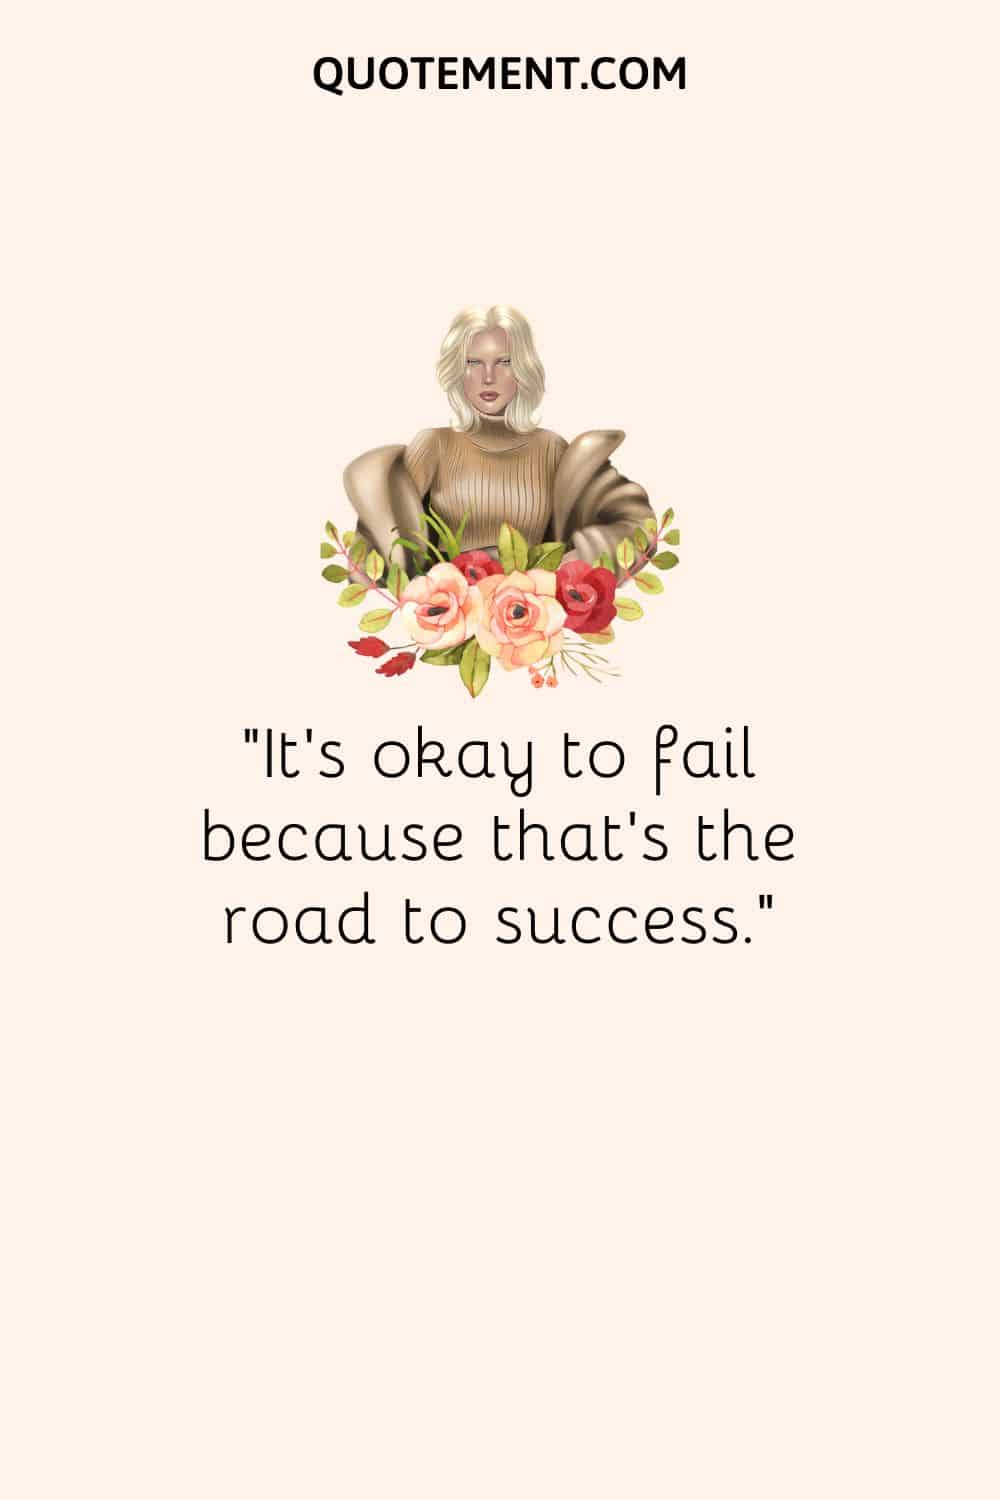 “It’s okay to fail because that’s the road to success.“